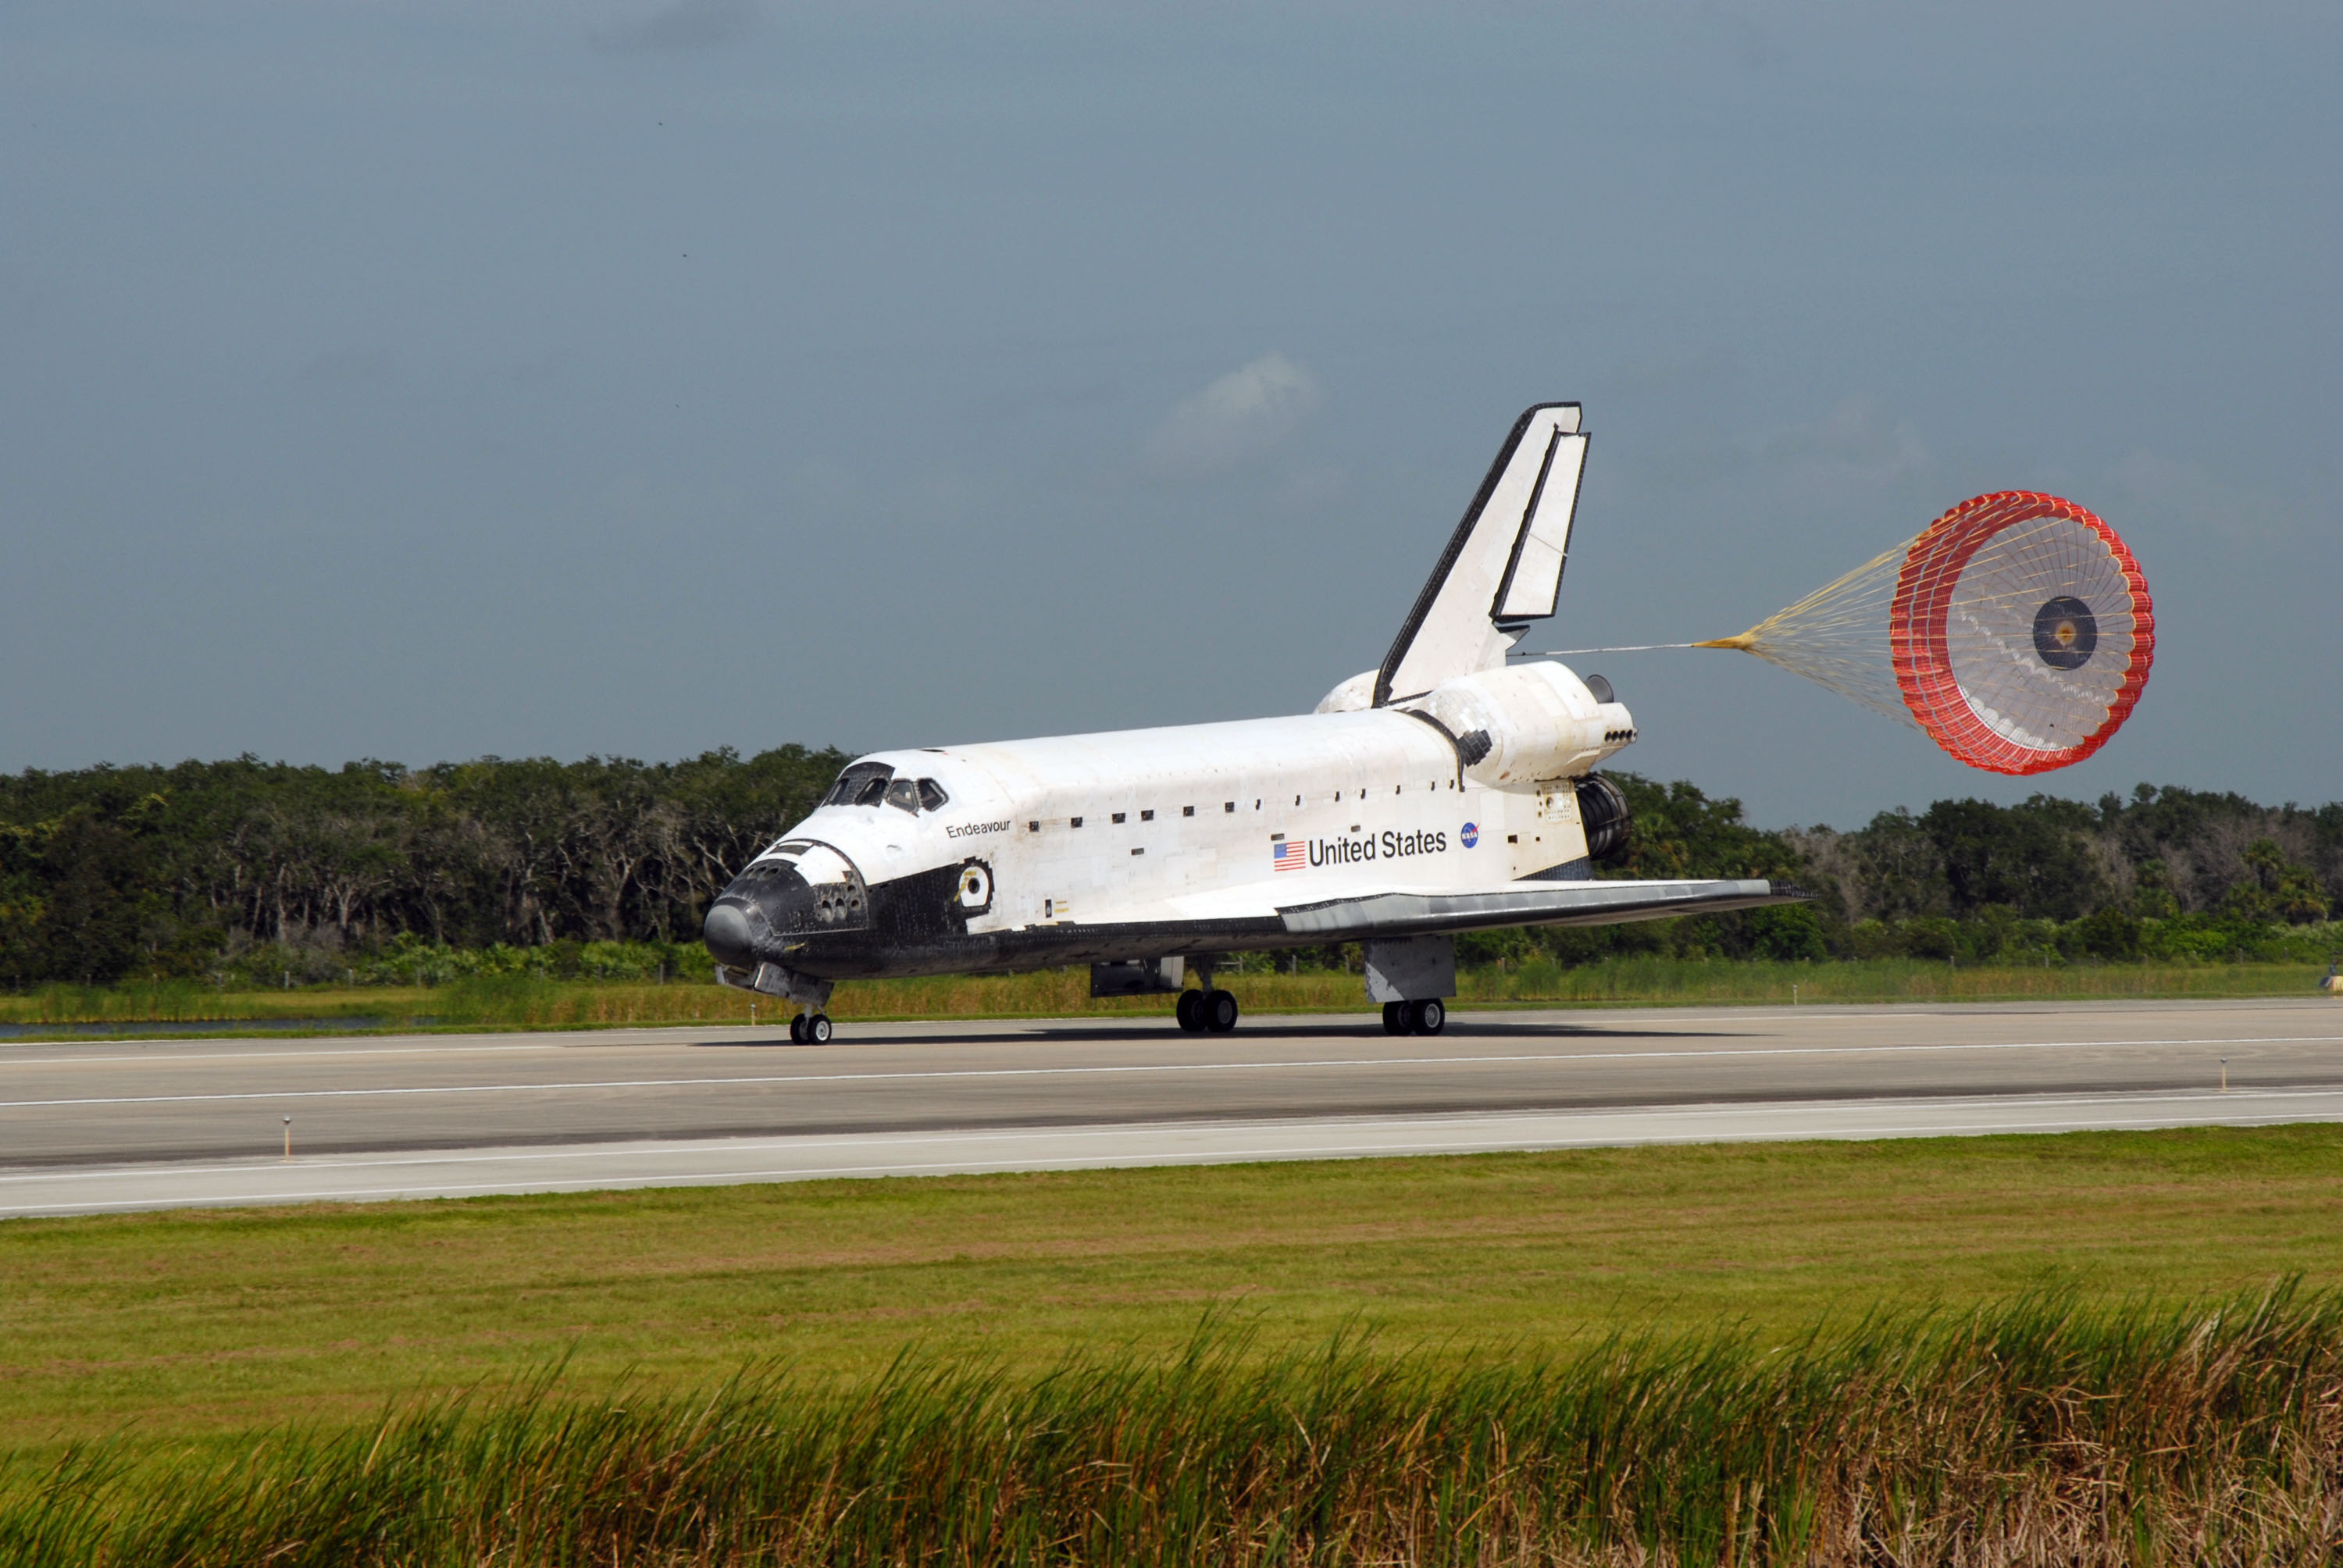 Endeavour touches down on the Shuttle Landing Facility at NASA's Kennedy Space Center in Florida